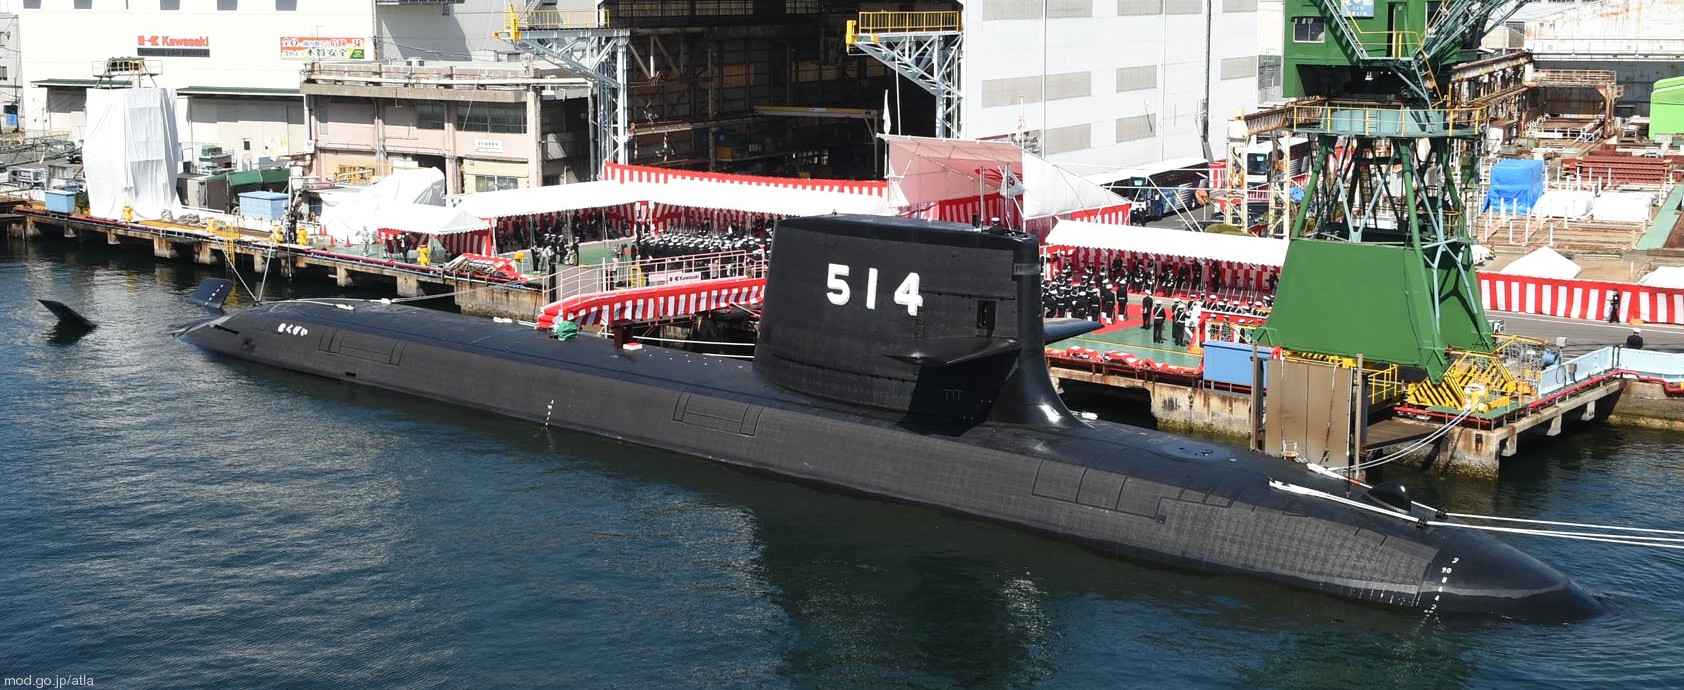 ss-514 js hakugei taigei 29ss class attack submarine ssk aip japan maritime self defense force jmsdf 08 commissioning